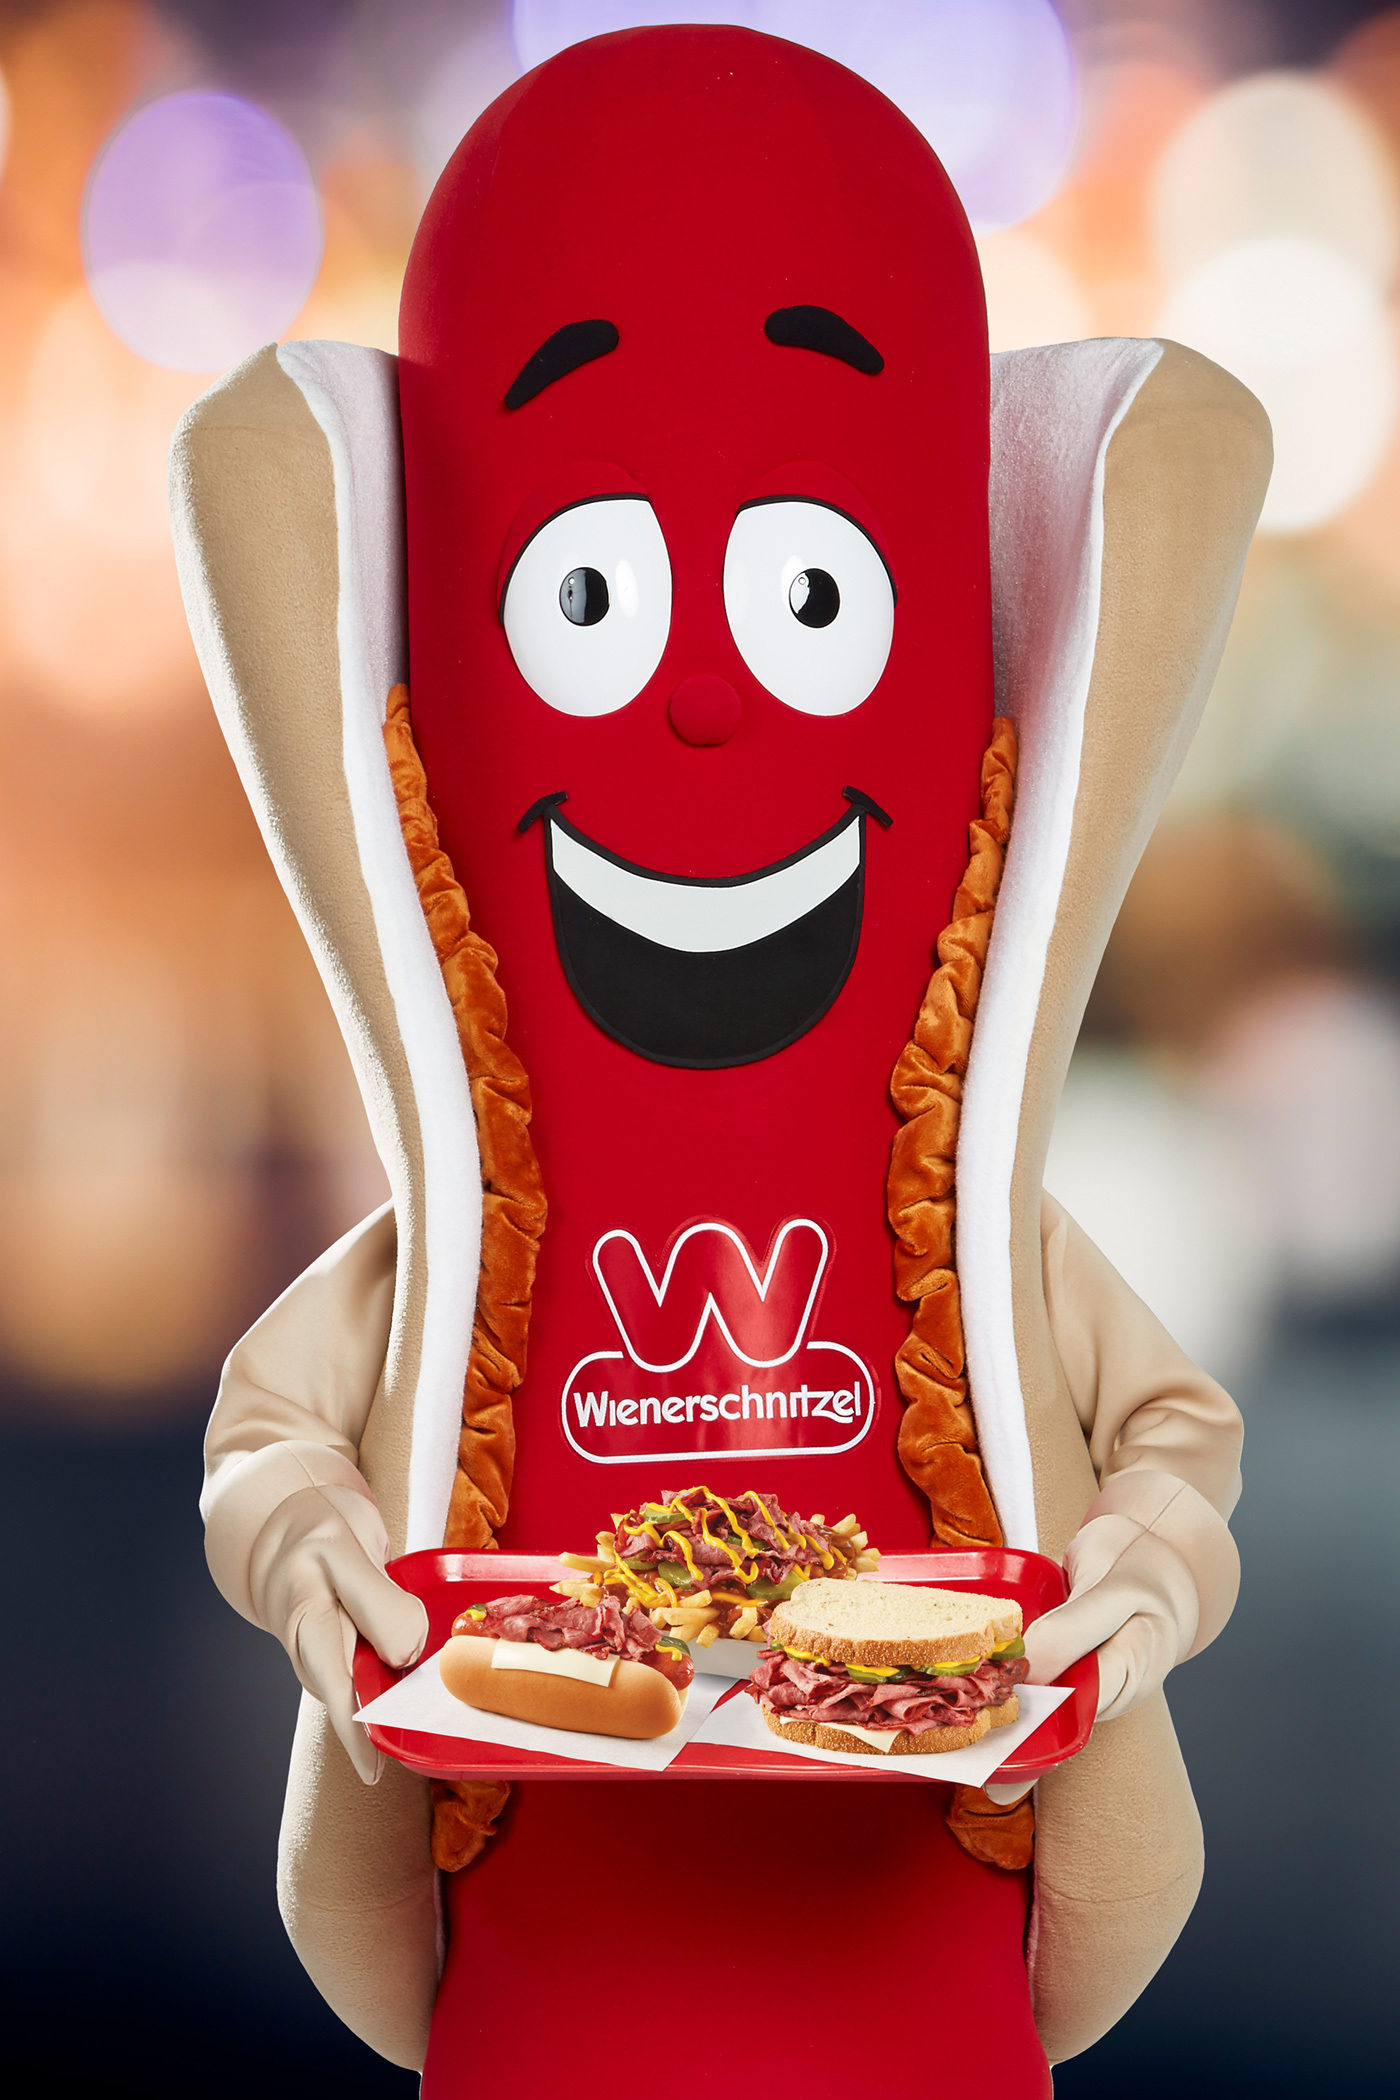 Wienerschnitzel Greets 2019 with Mouth-Watering Offers | Business Wire